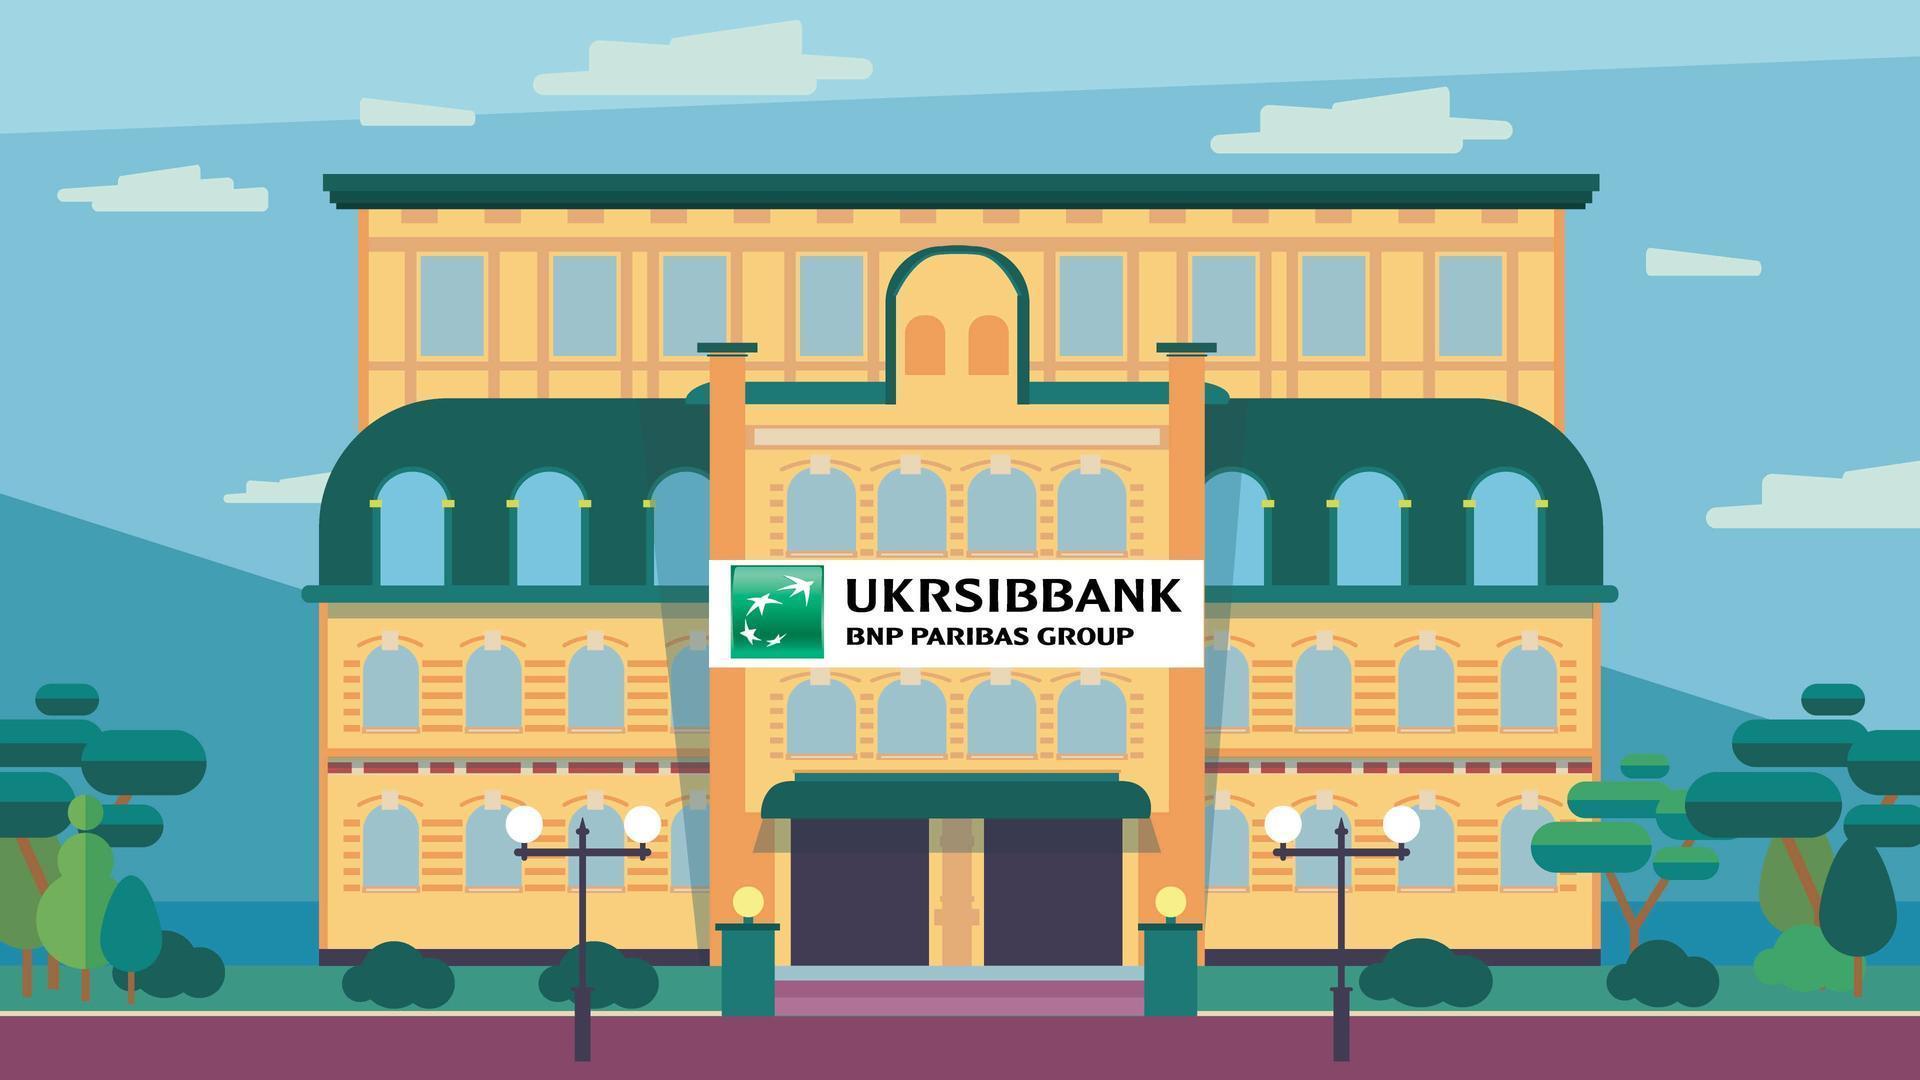 Case: Development of 2D Video and banner advertising for UKRSIBBANK — Rubarb - Image - 1